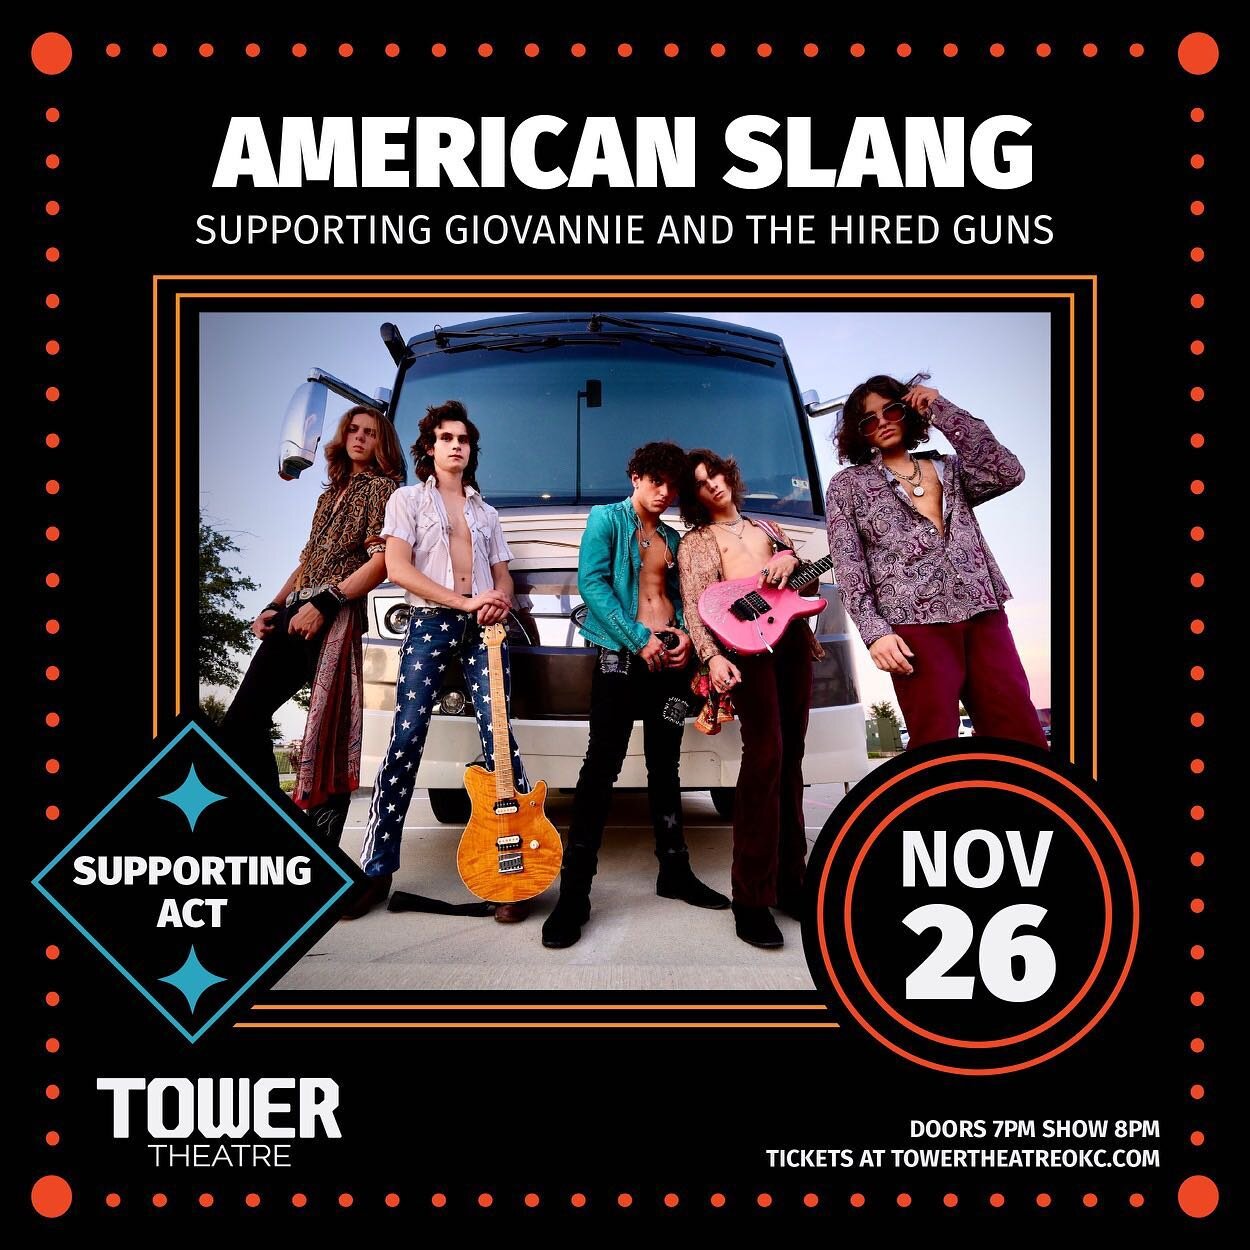 ⚡️NOVEMBER 26TH⚡️

WE&rsquo;RE HOME!!!

Back in our city, live at @towertheatreokc playing some real rock n roll with @giovannieandthehiredguns 🔥

No chance you want to miss this, tickets on sale now!! (Link in bio)

See you soon 🤘🏼